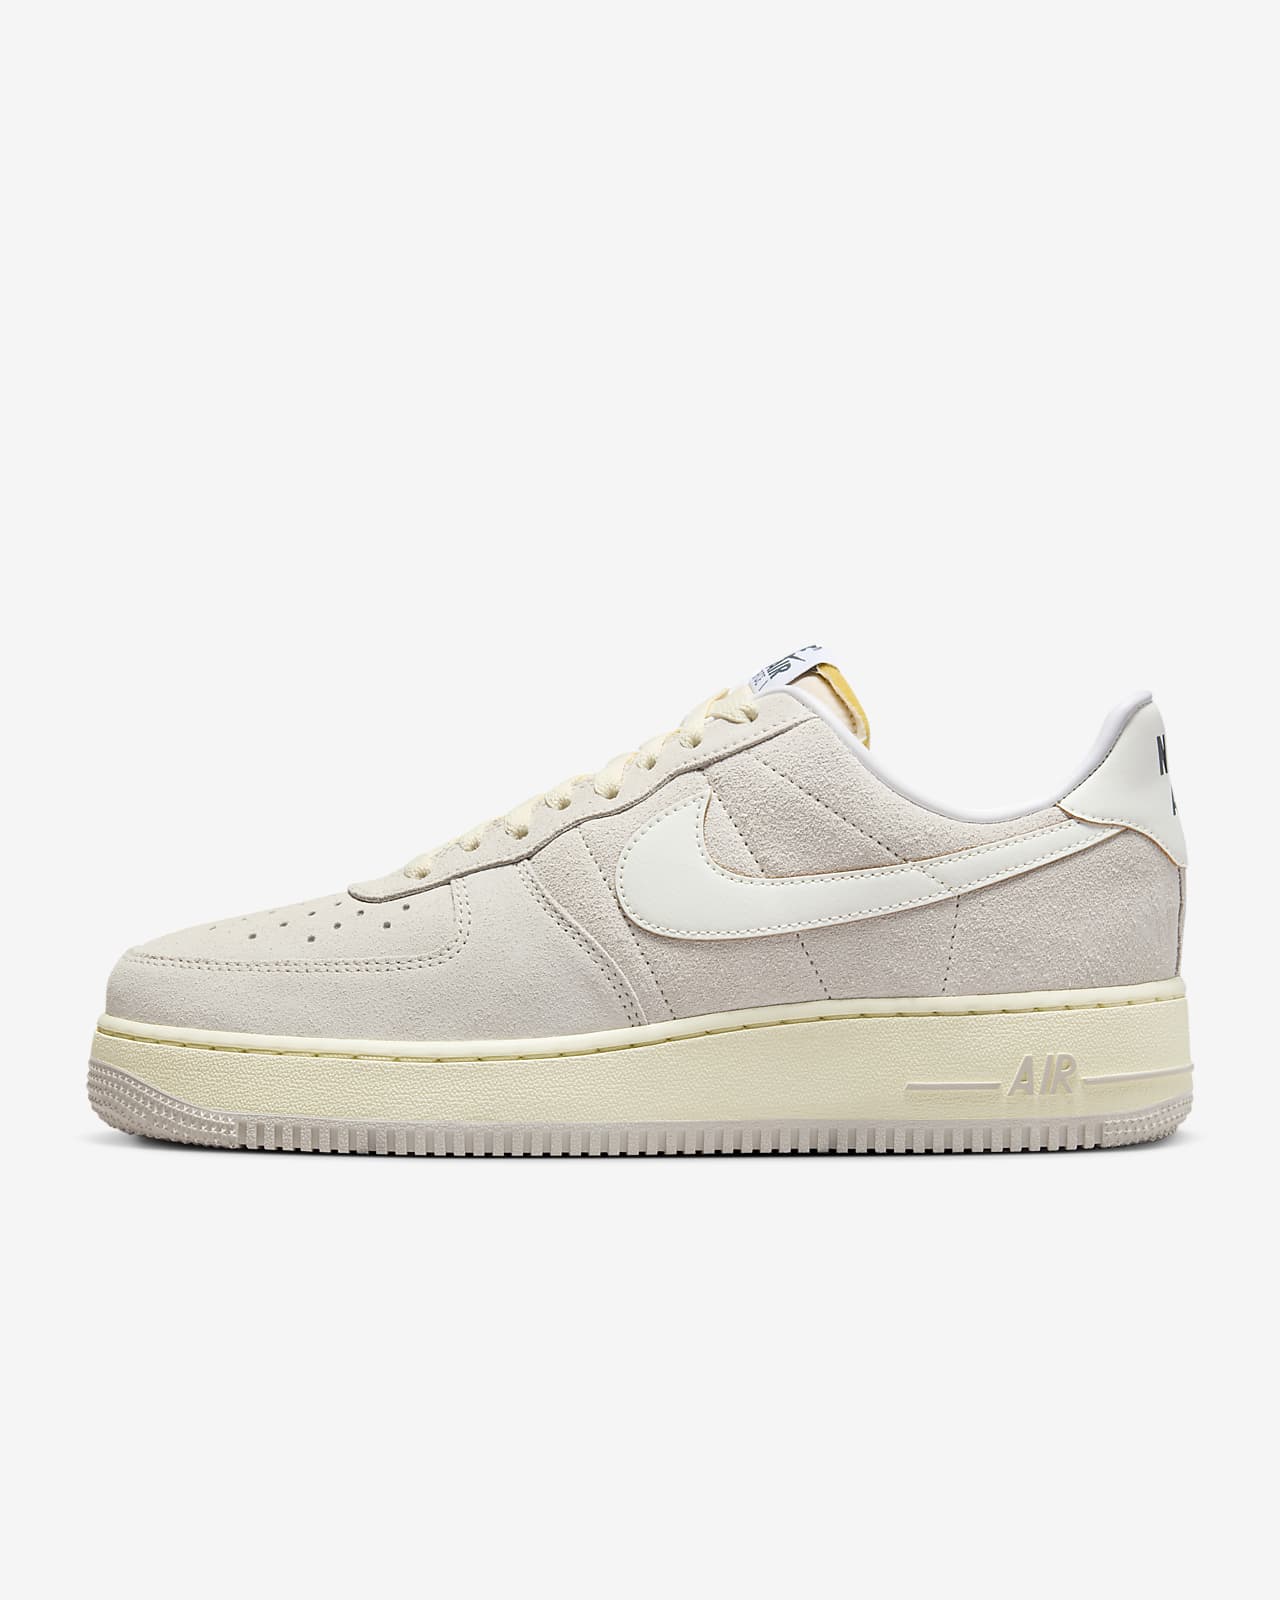 Nike Men's Air Force 1 07 LV8 Suede Basketball Shoes (10.5